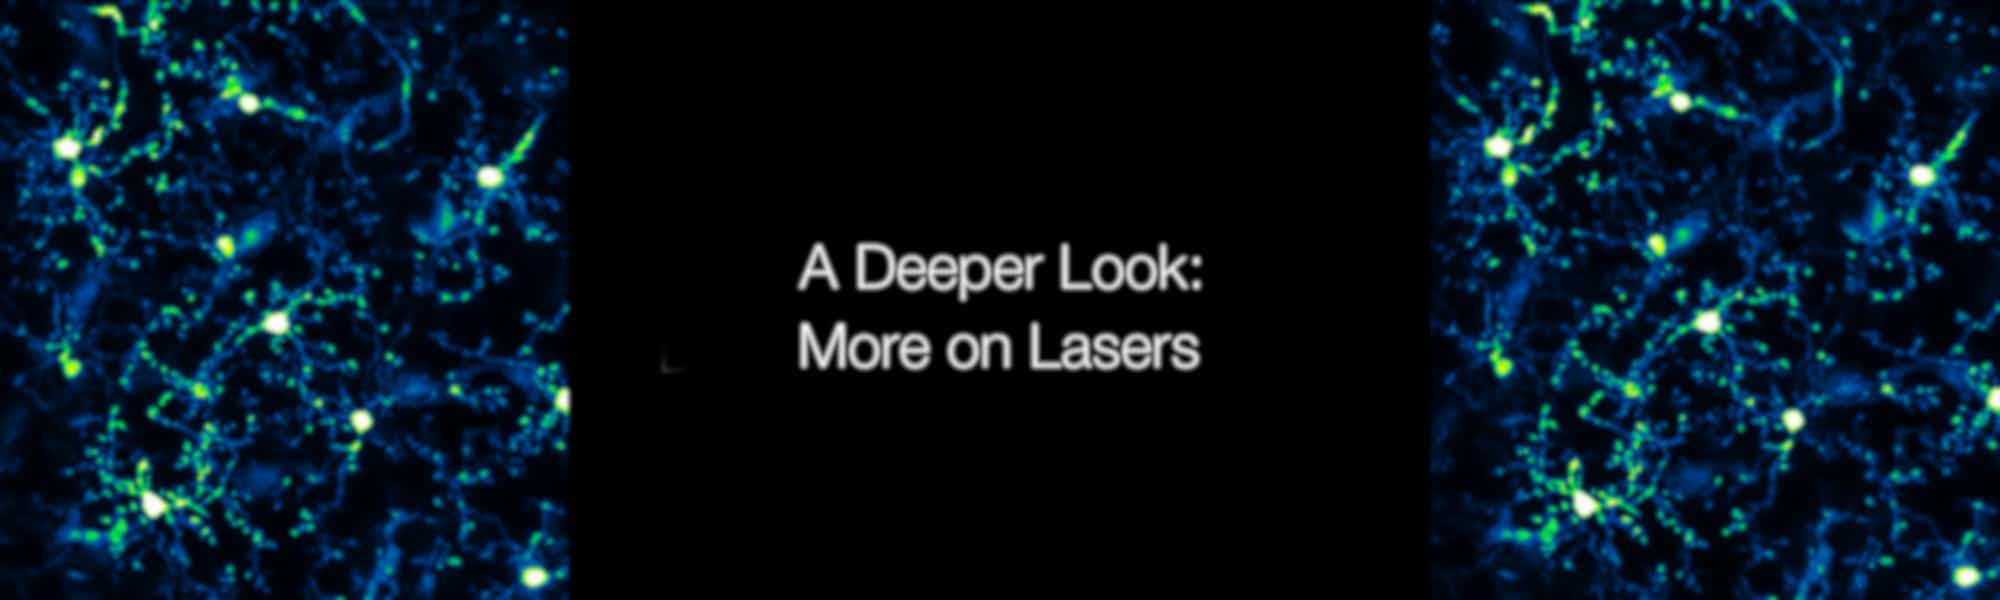 Deeper Look Series: More on Lasers - choose the laser that best fits your experimental set up